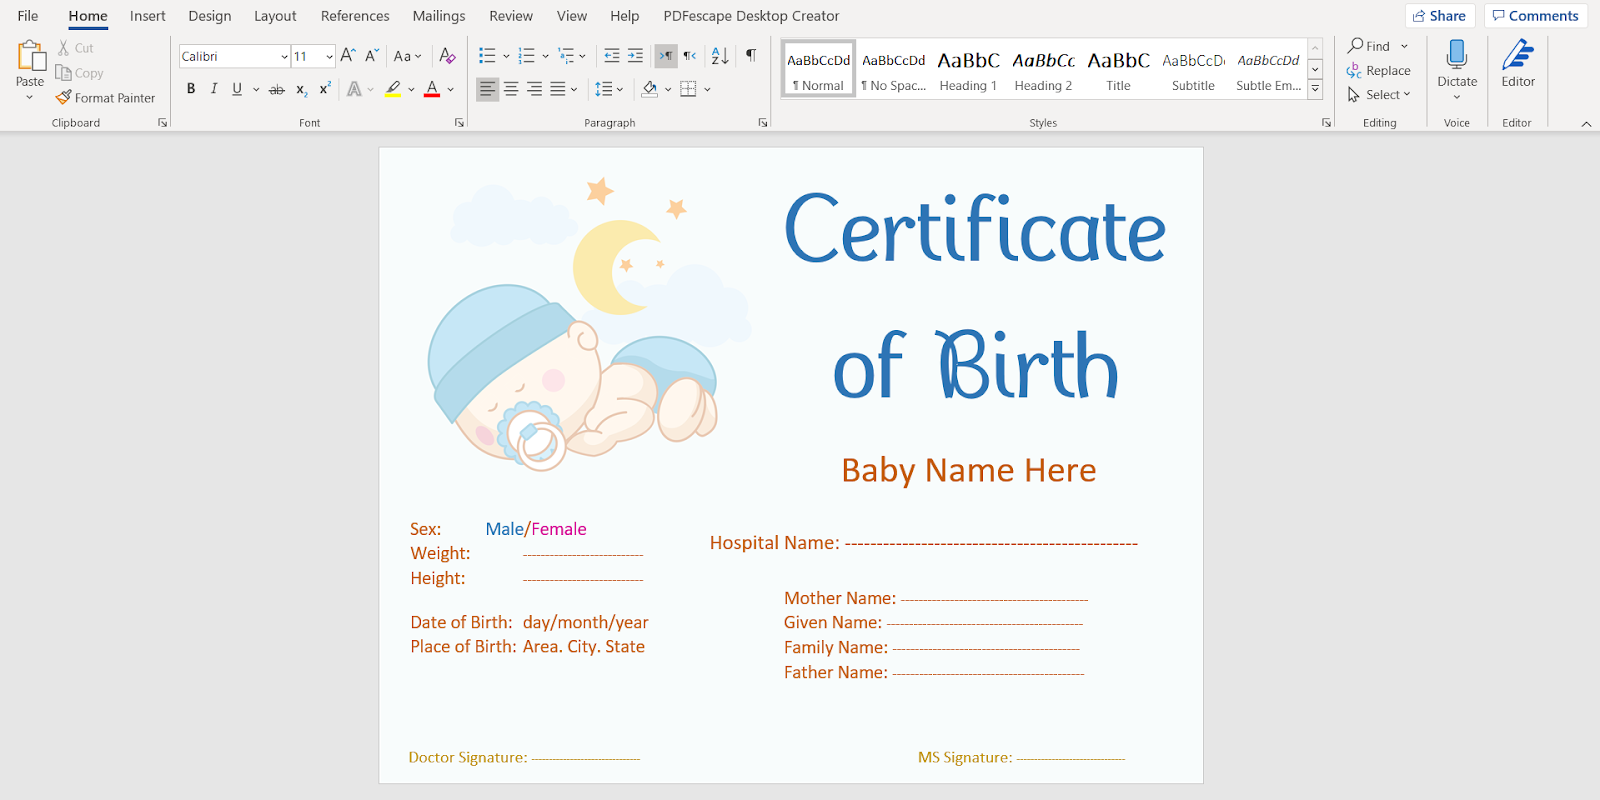 10+ FREE Birth Certificate Templates (Word  AI  PSD) - DIY Throughout Birth Certificate Templates For Word